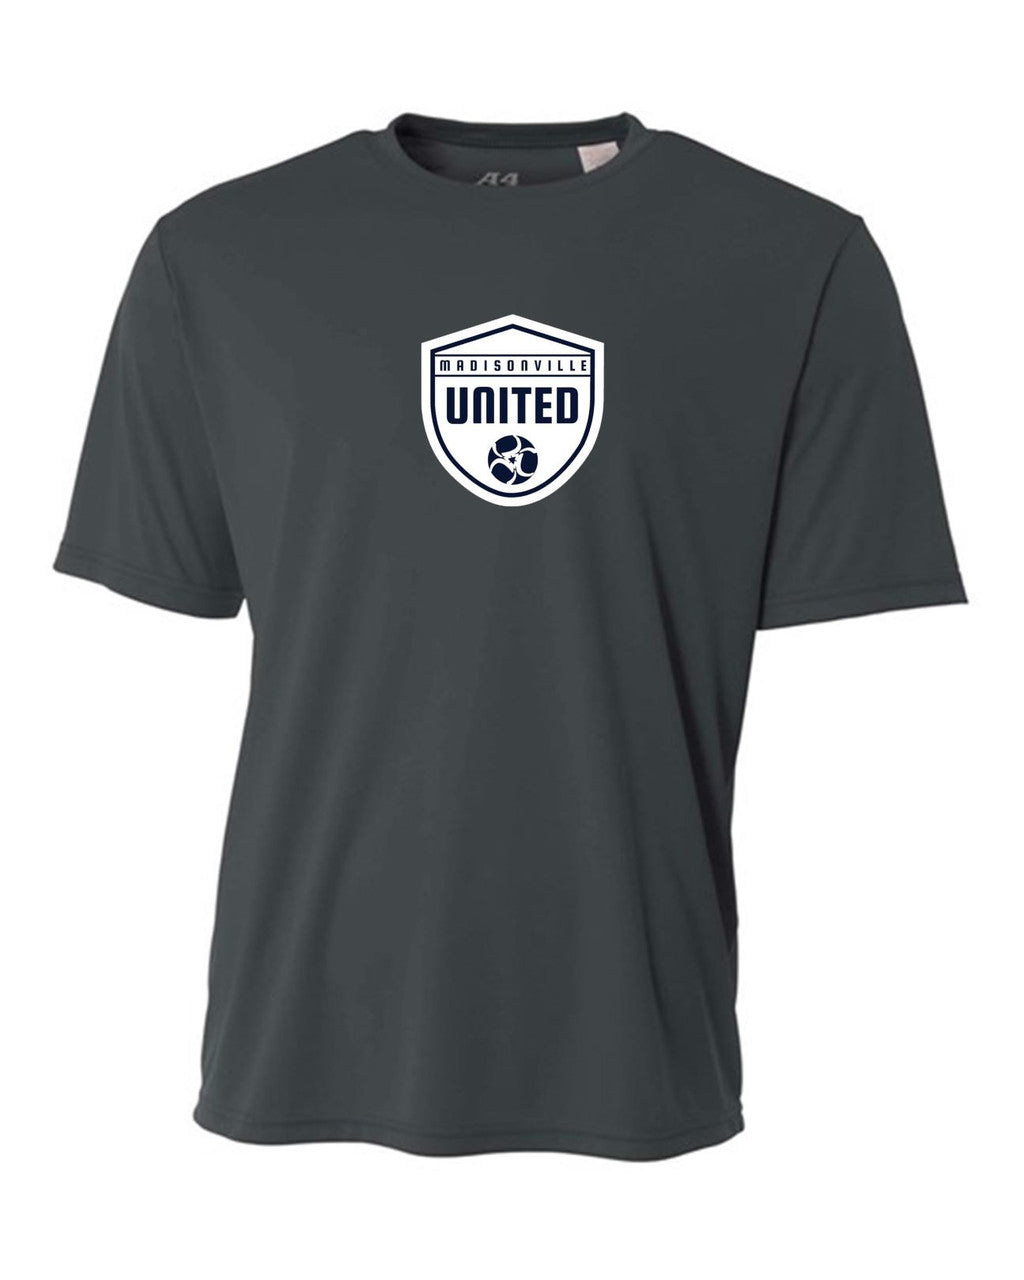 A4 Madisonville United Men's SS Training Tee Madisonville United 22-24 GRAPHITE MENS SMALL - Third Coast Soccer